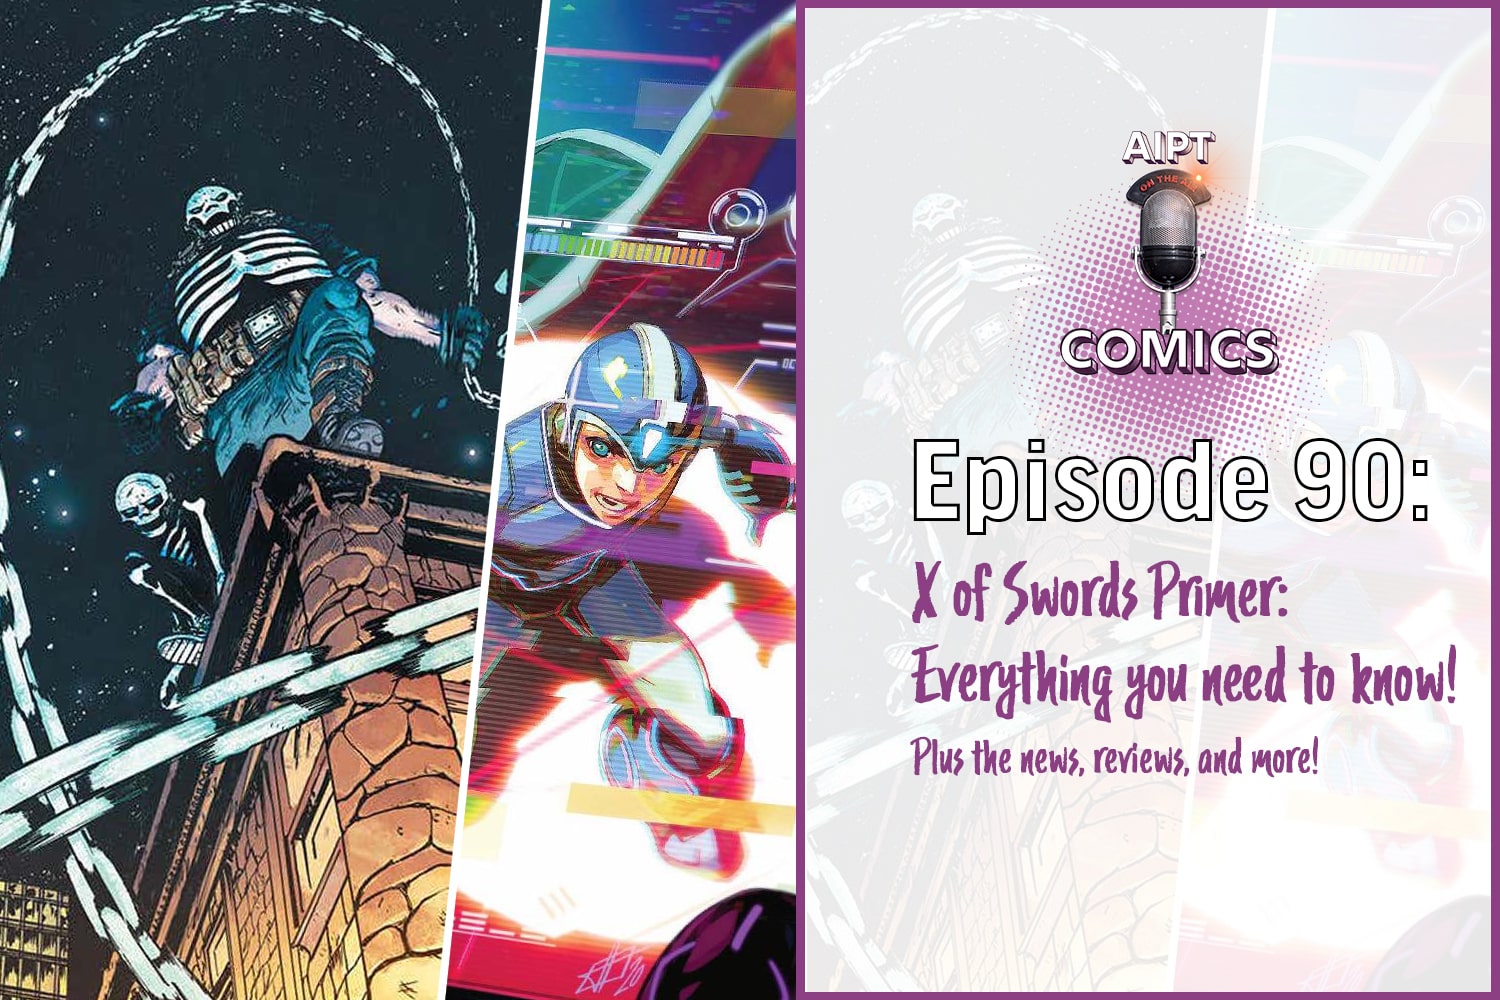 AIPT Comics Podcast Episode 90: X of Swords primer: Everything you need to know